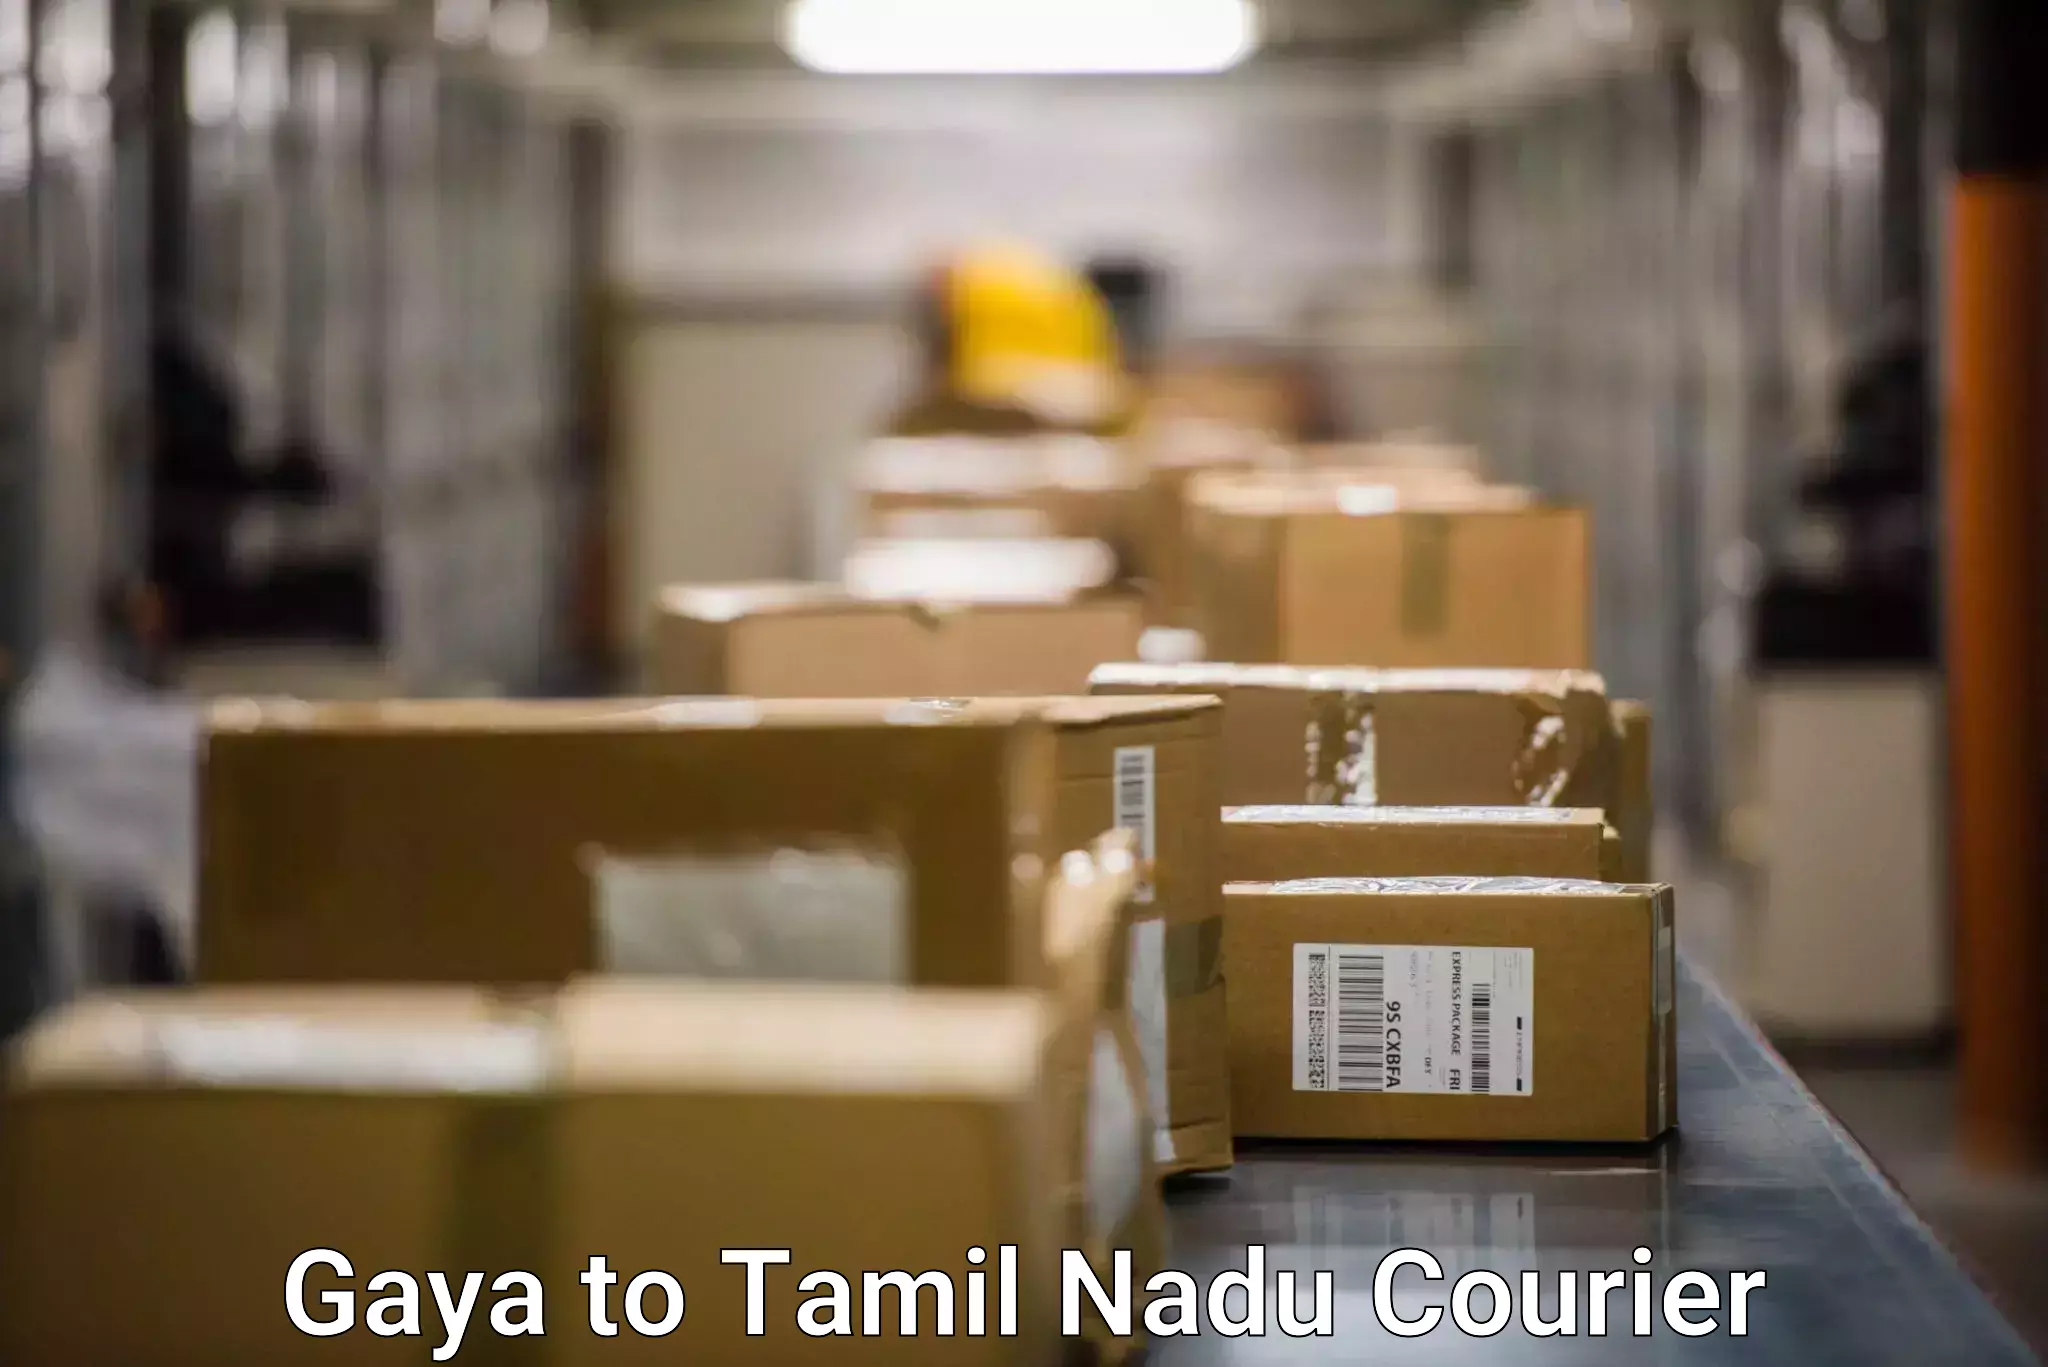 Shipping and handling Gaya to Shanmugha Arts Science Technology and Research Academy Thanjavur